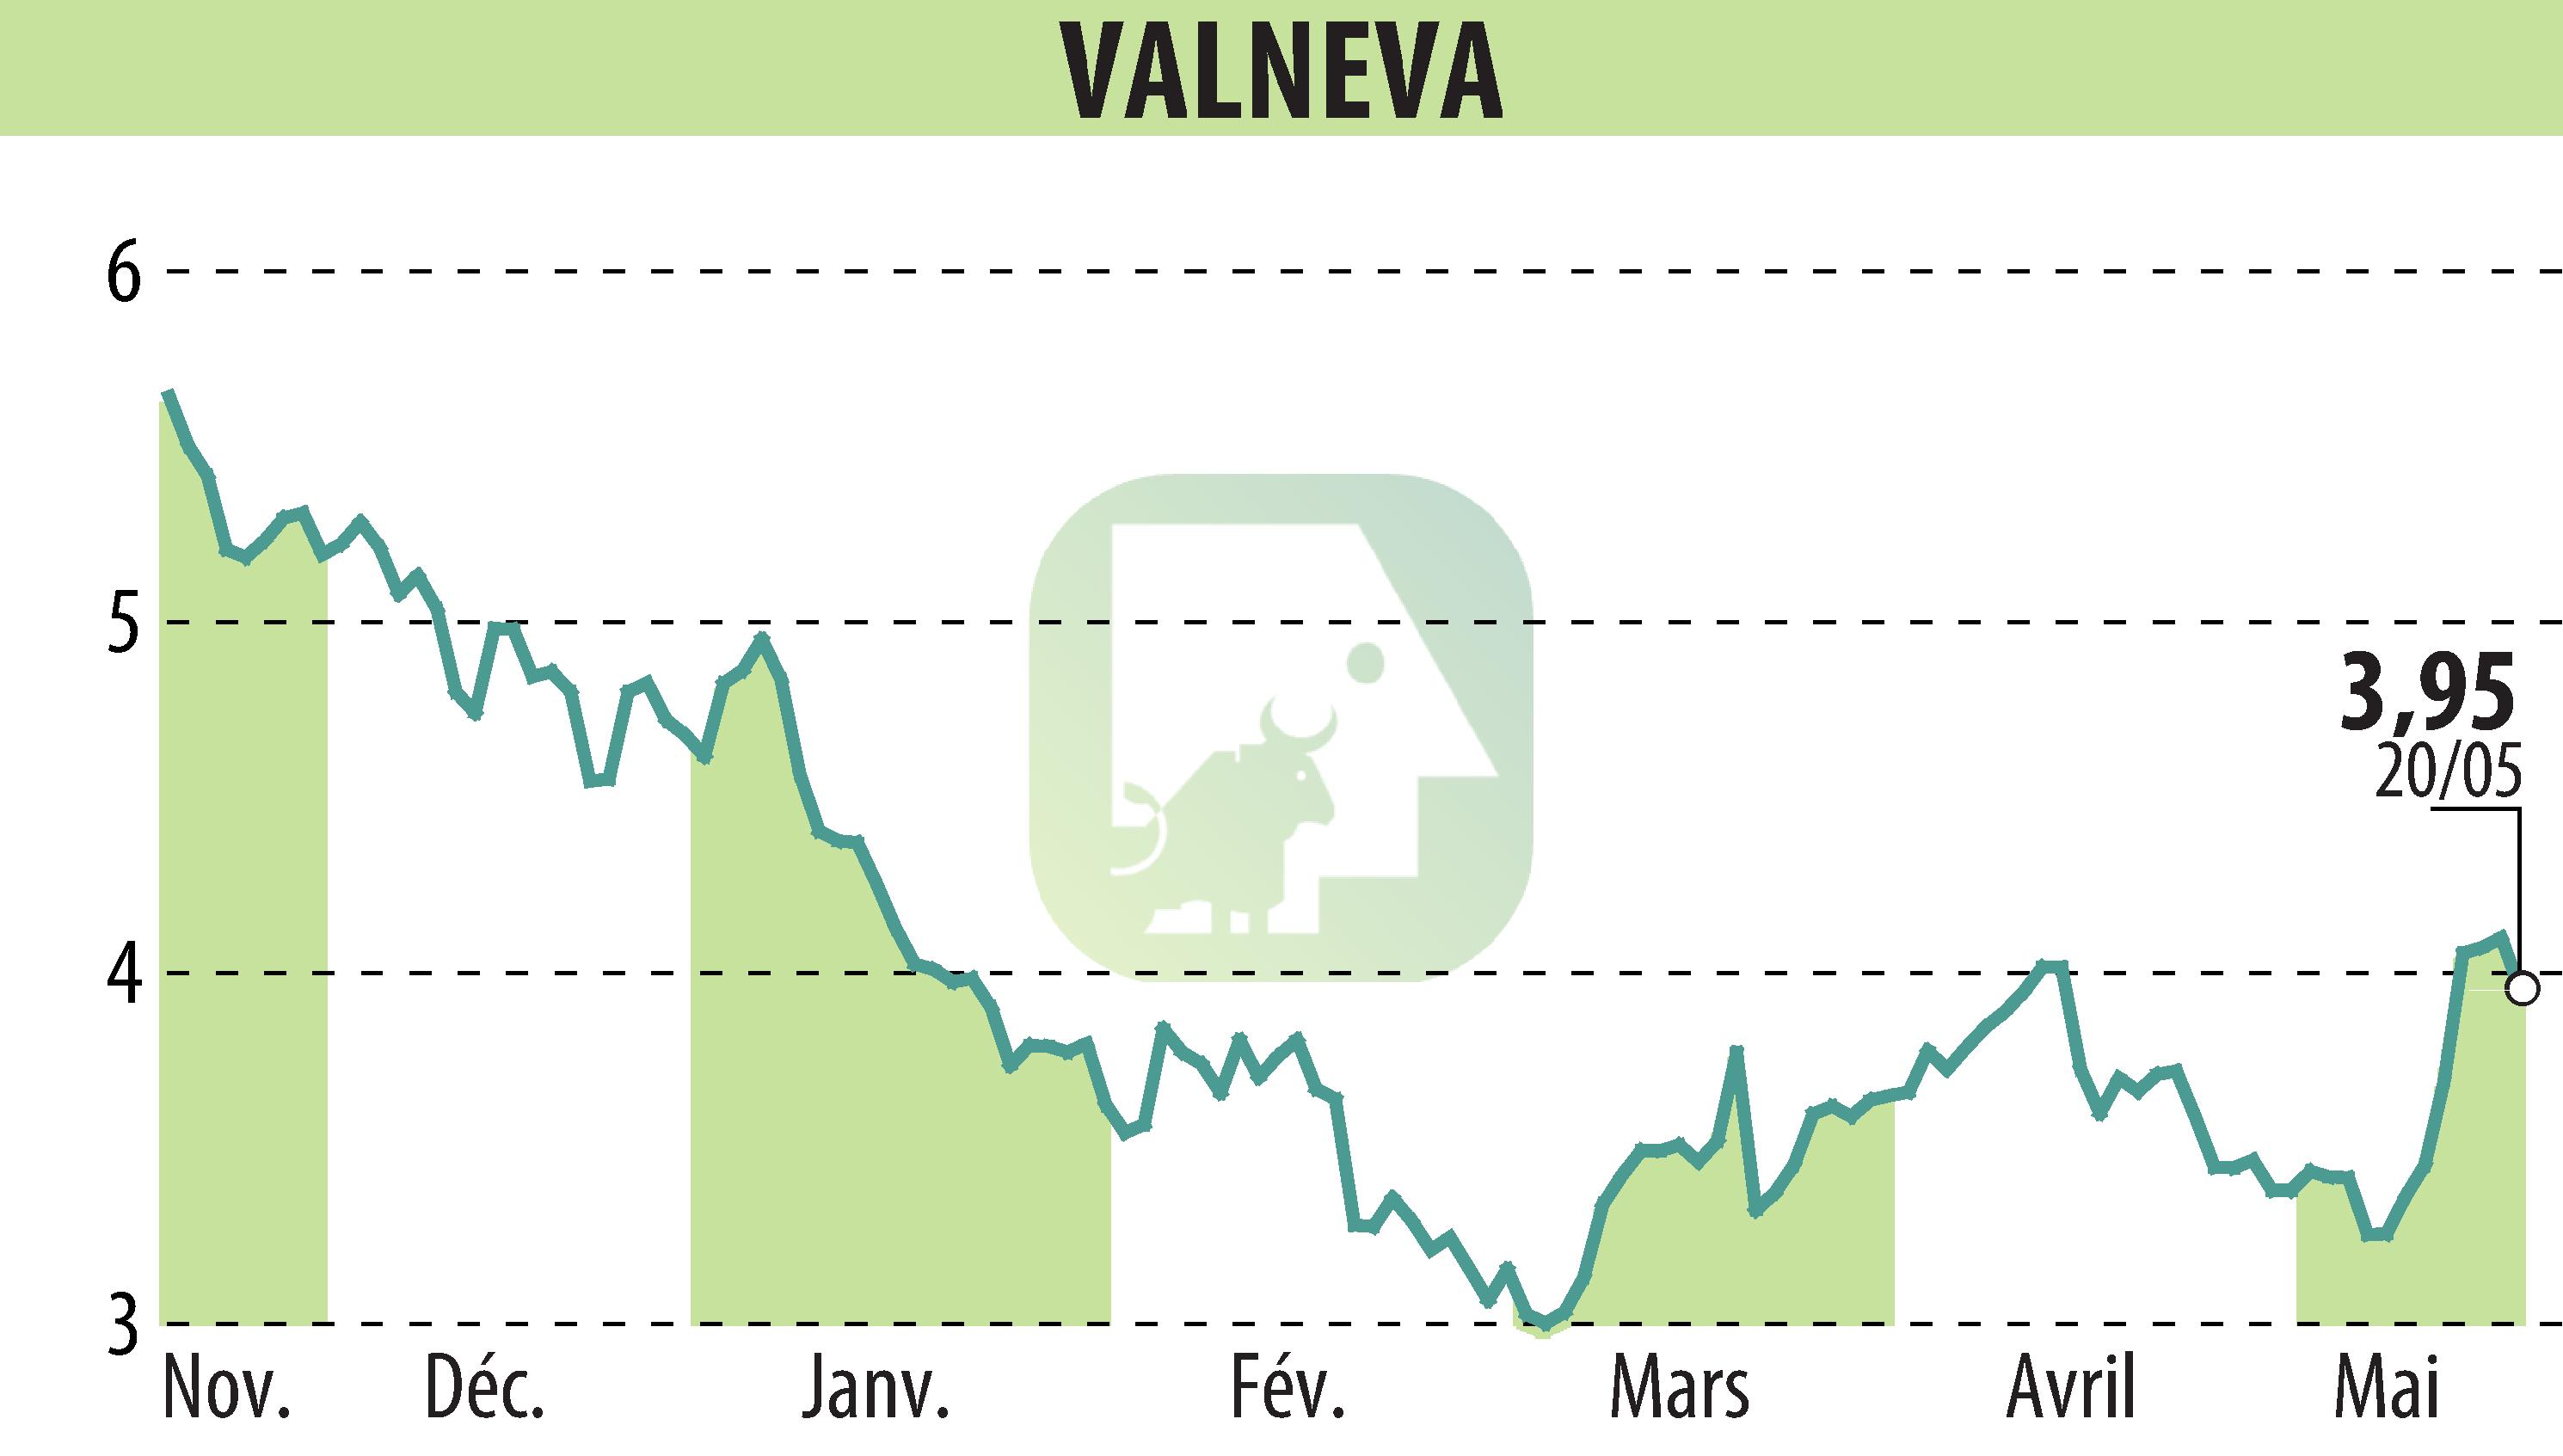 Stock price chart of VALNEVA (EPA:VLA) showing fluctuations.